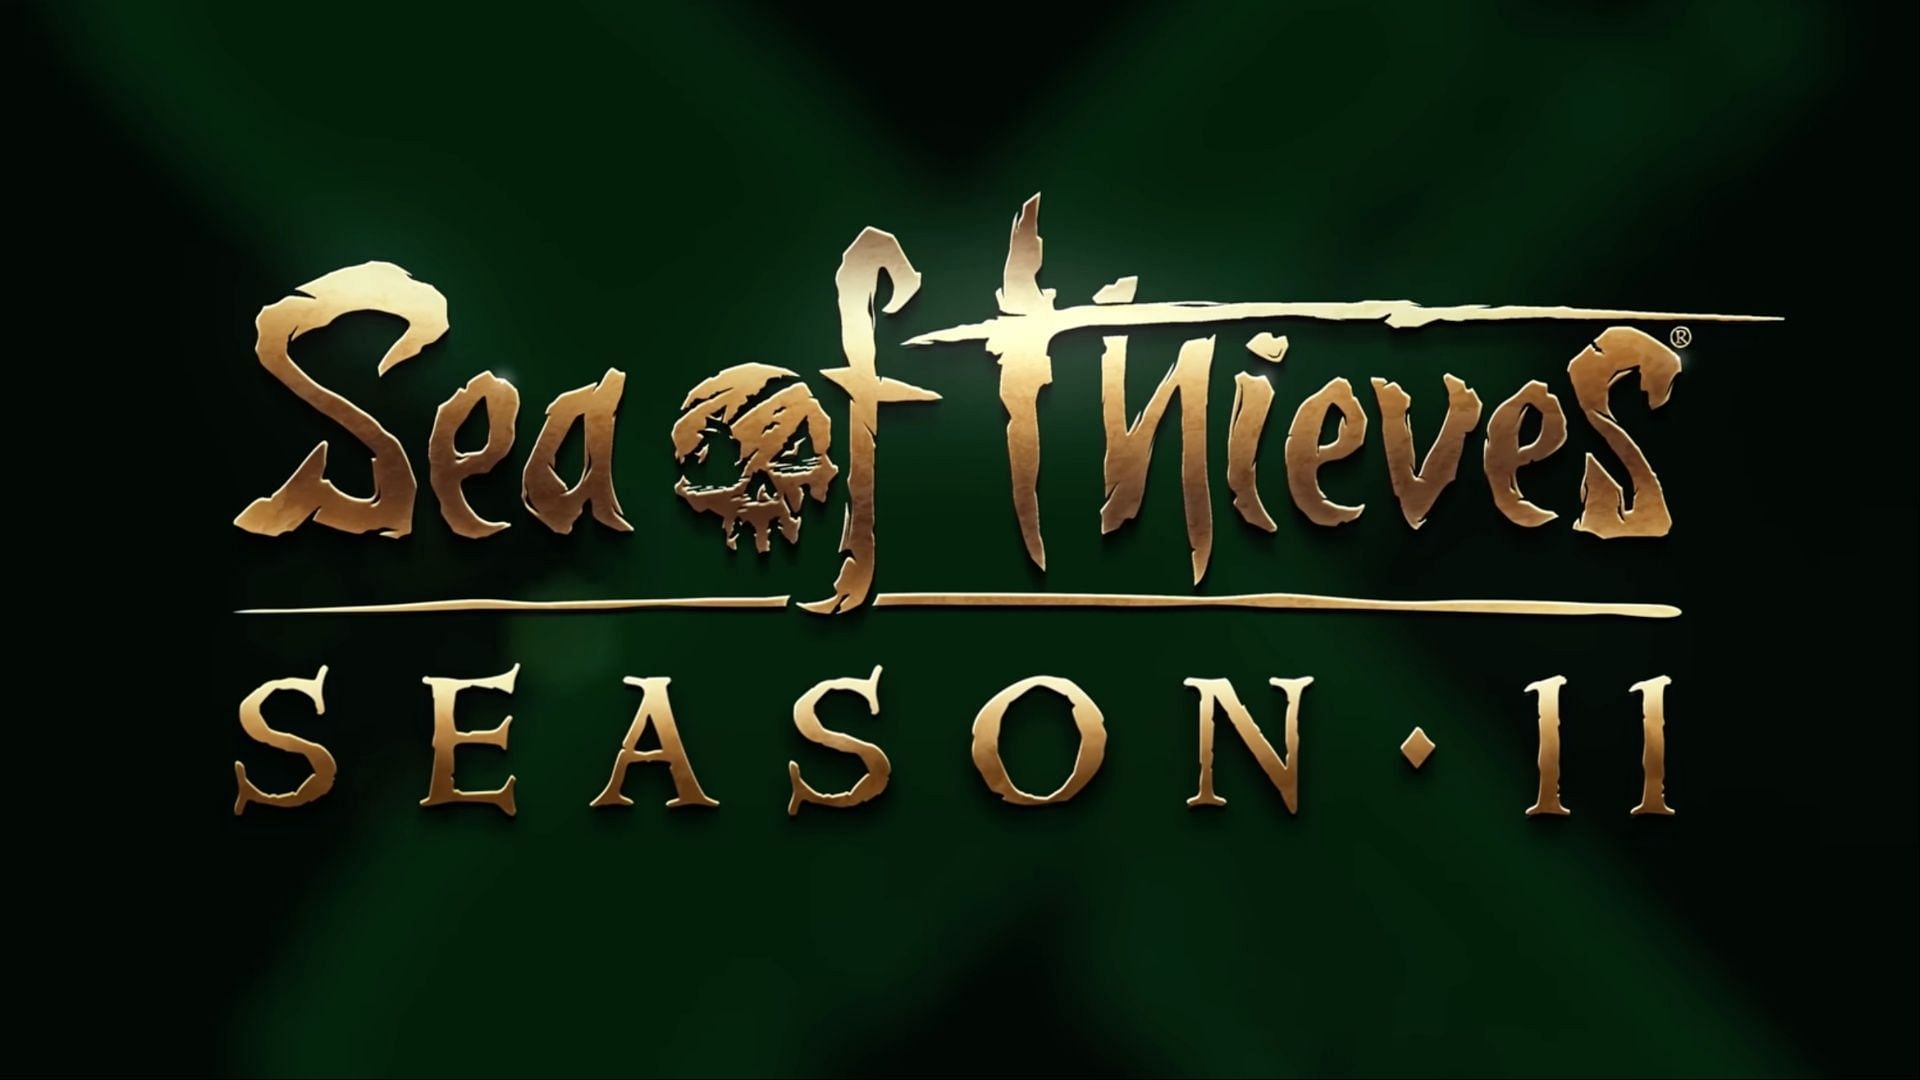 Sea of Thieves Season 11 patch notes are now online